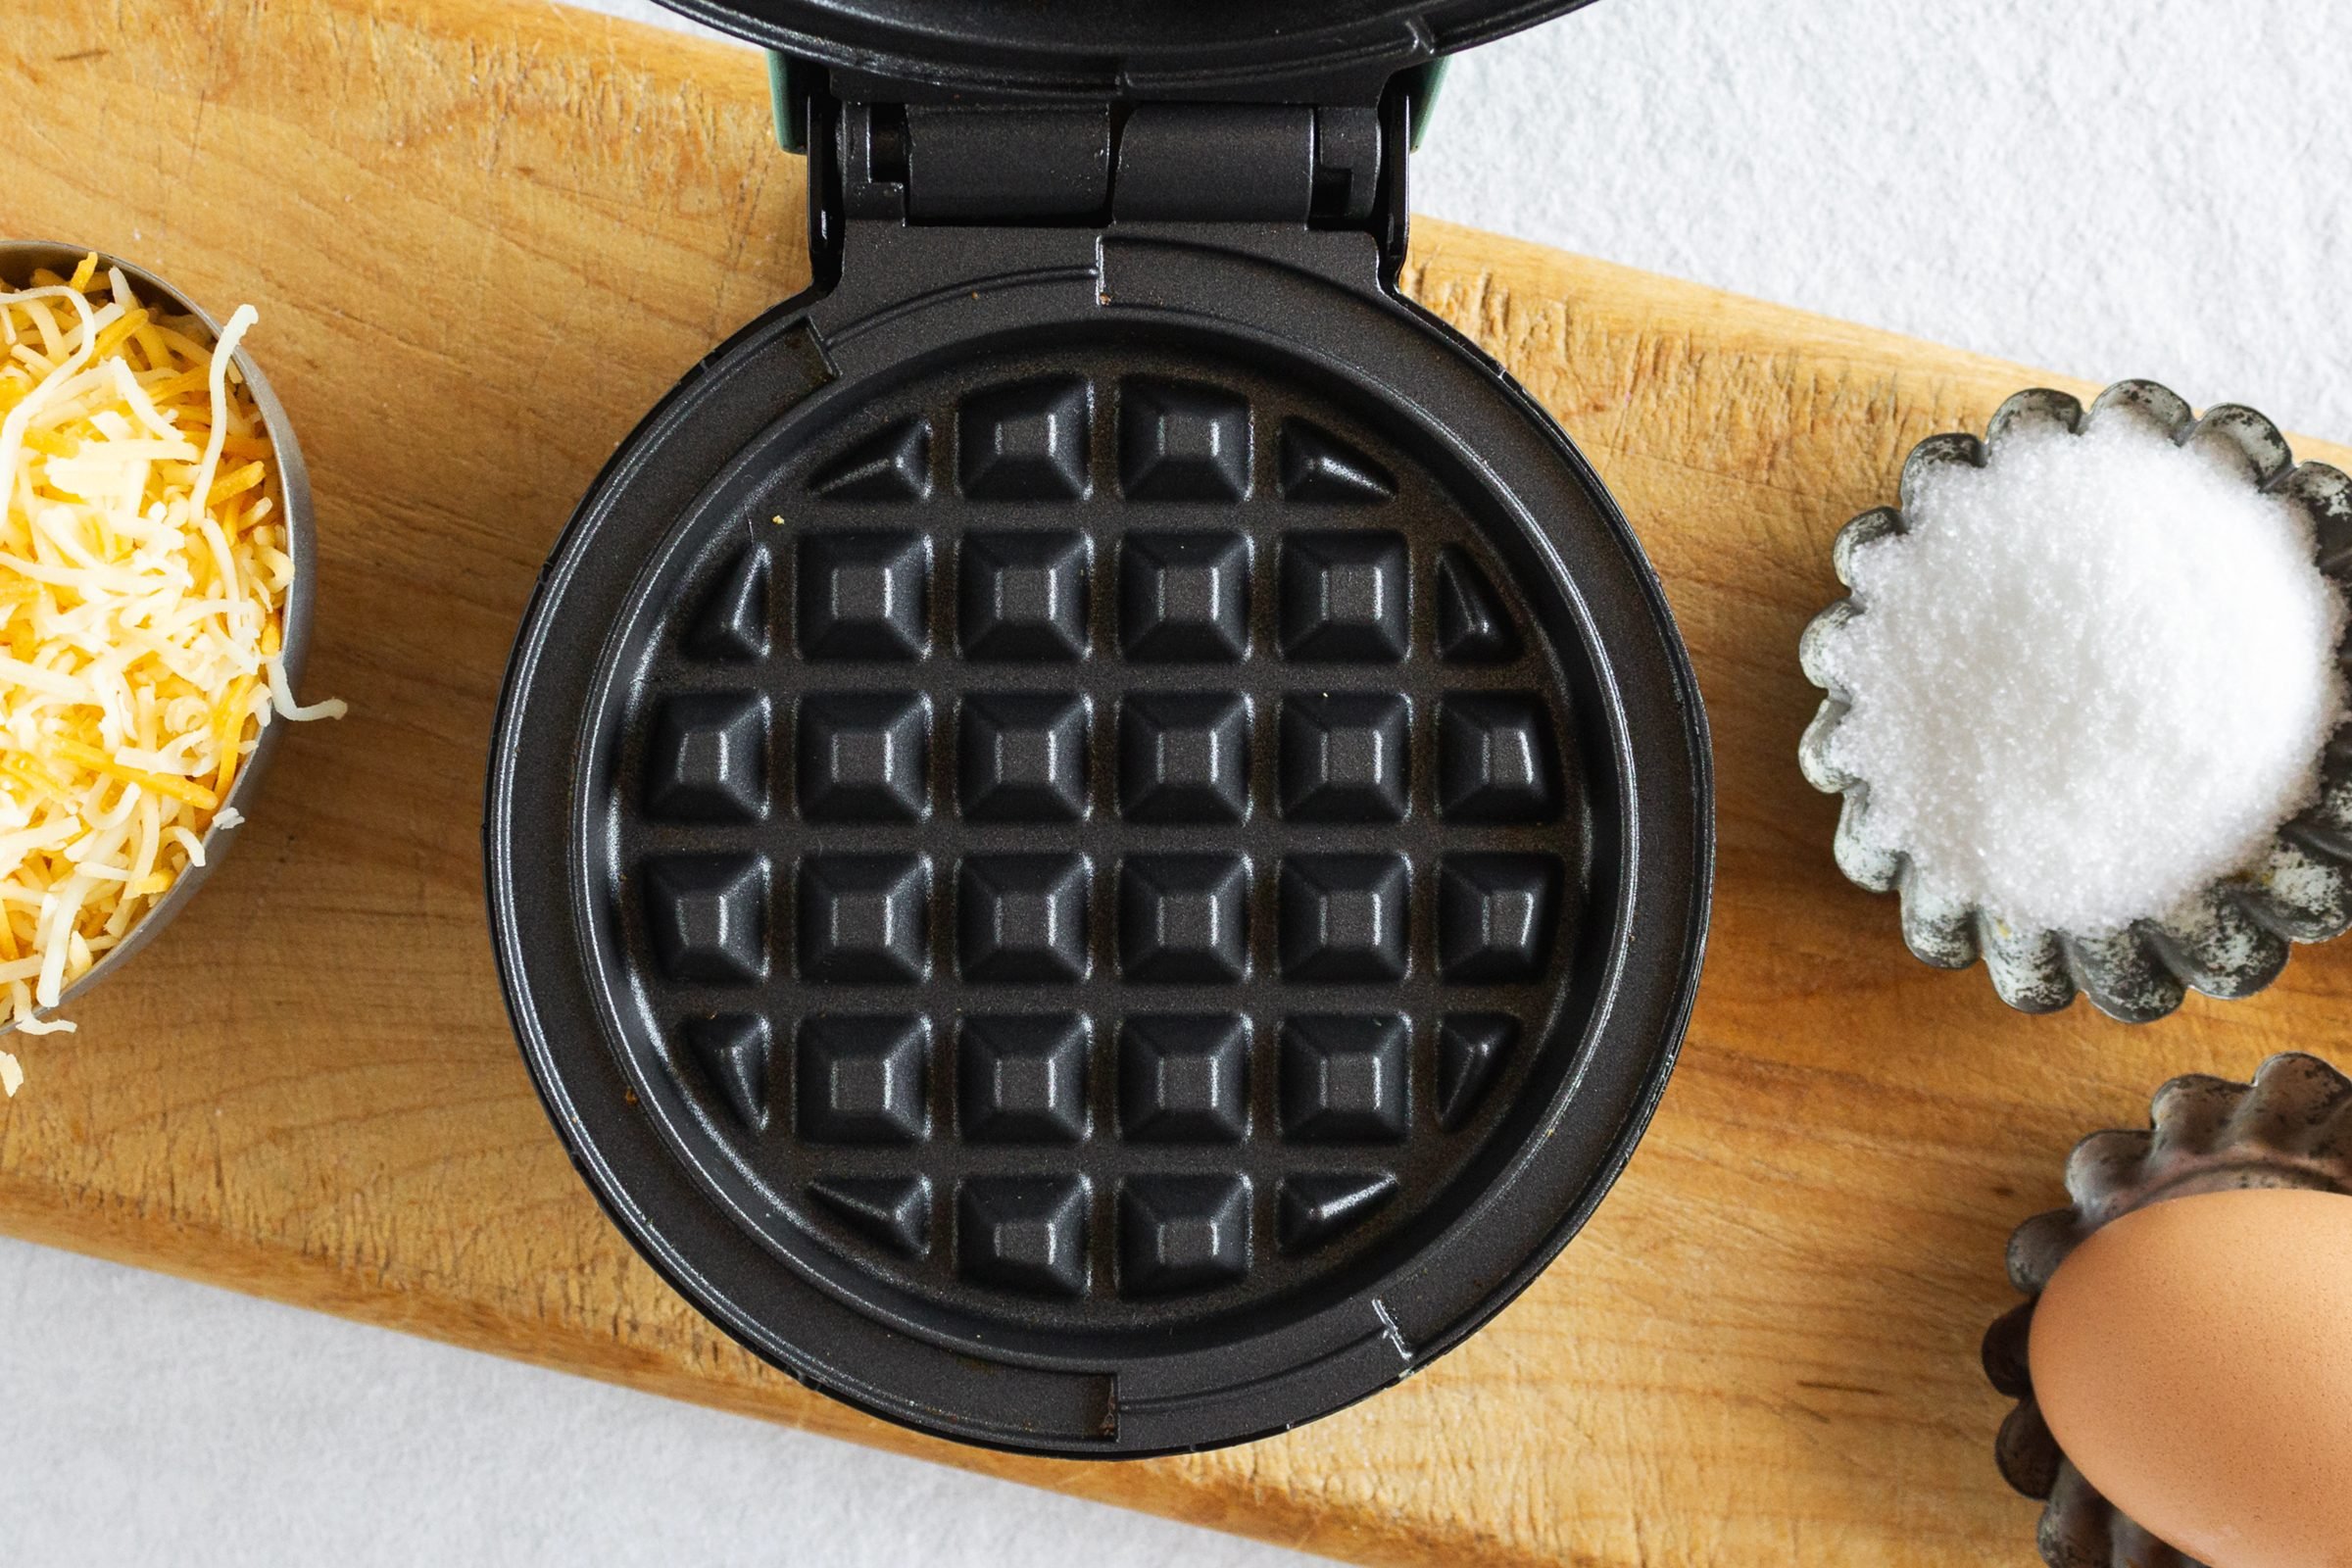 Heating Waffle Maker For Chaffles